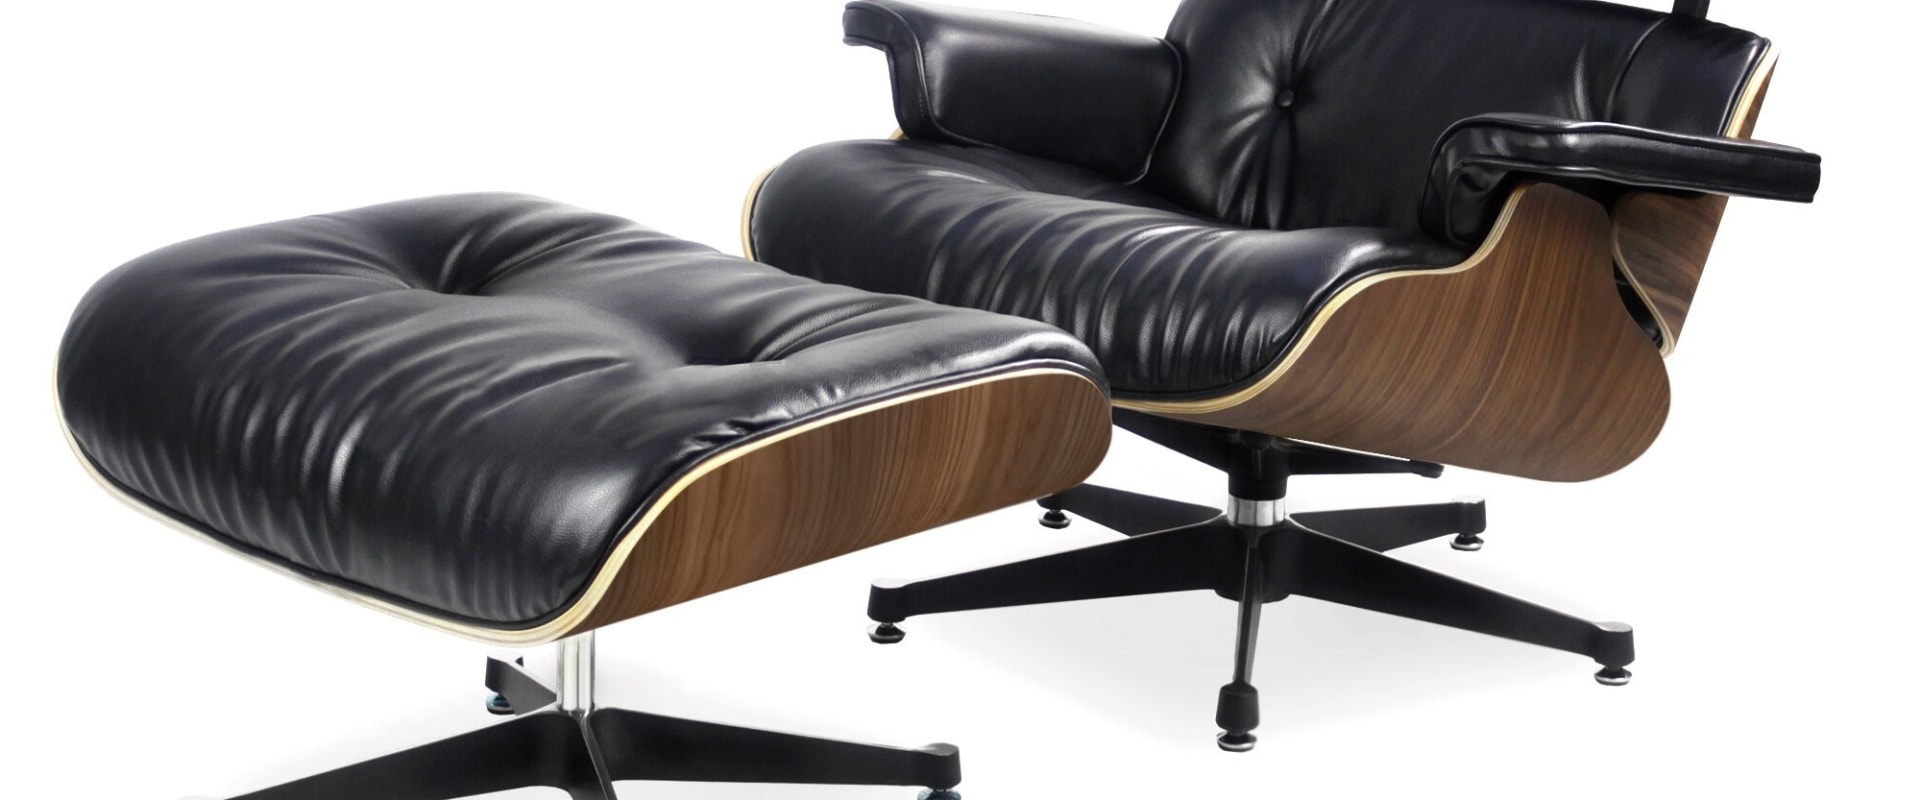 The Best Place to Buy an Eames Office Chair Replica